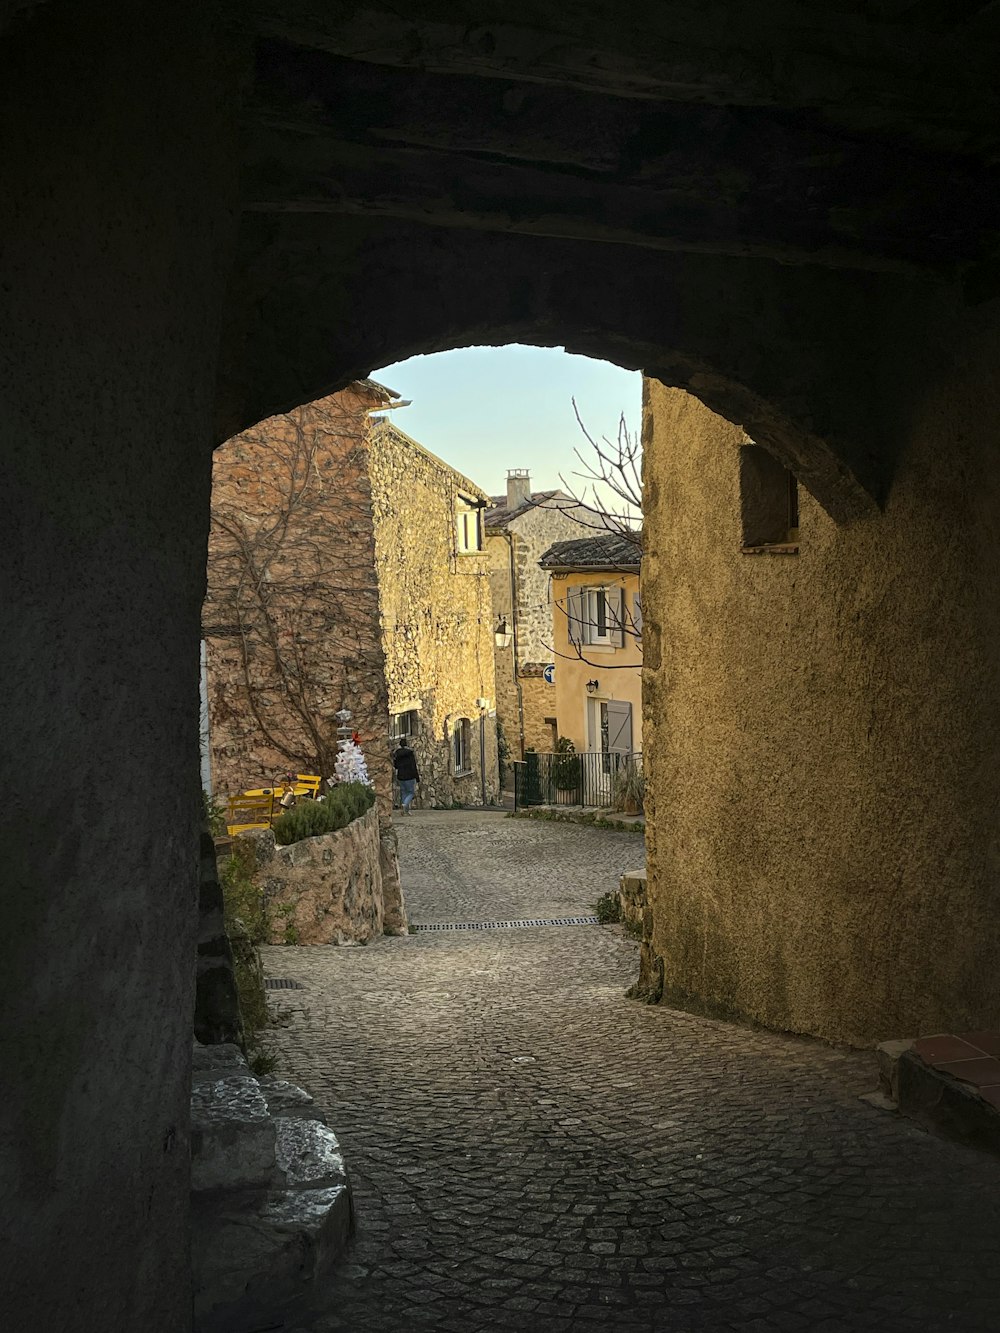 a cobblestone street with a person walking down it